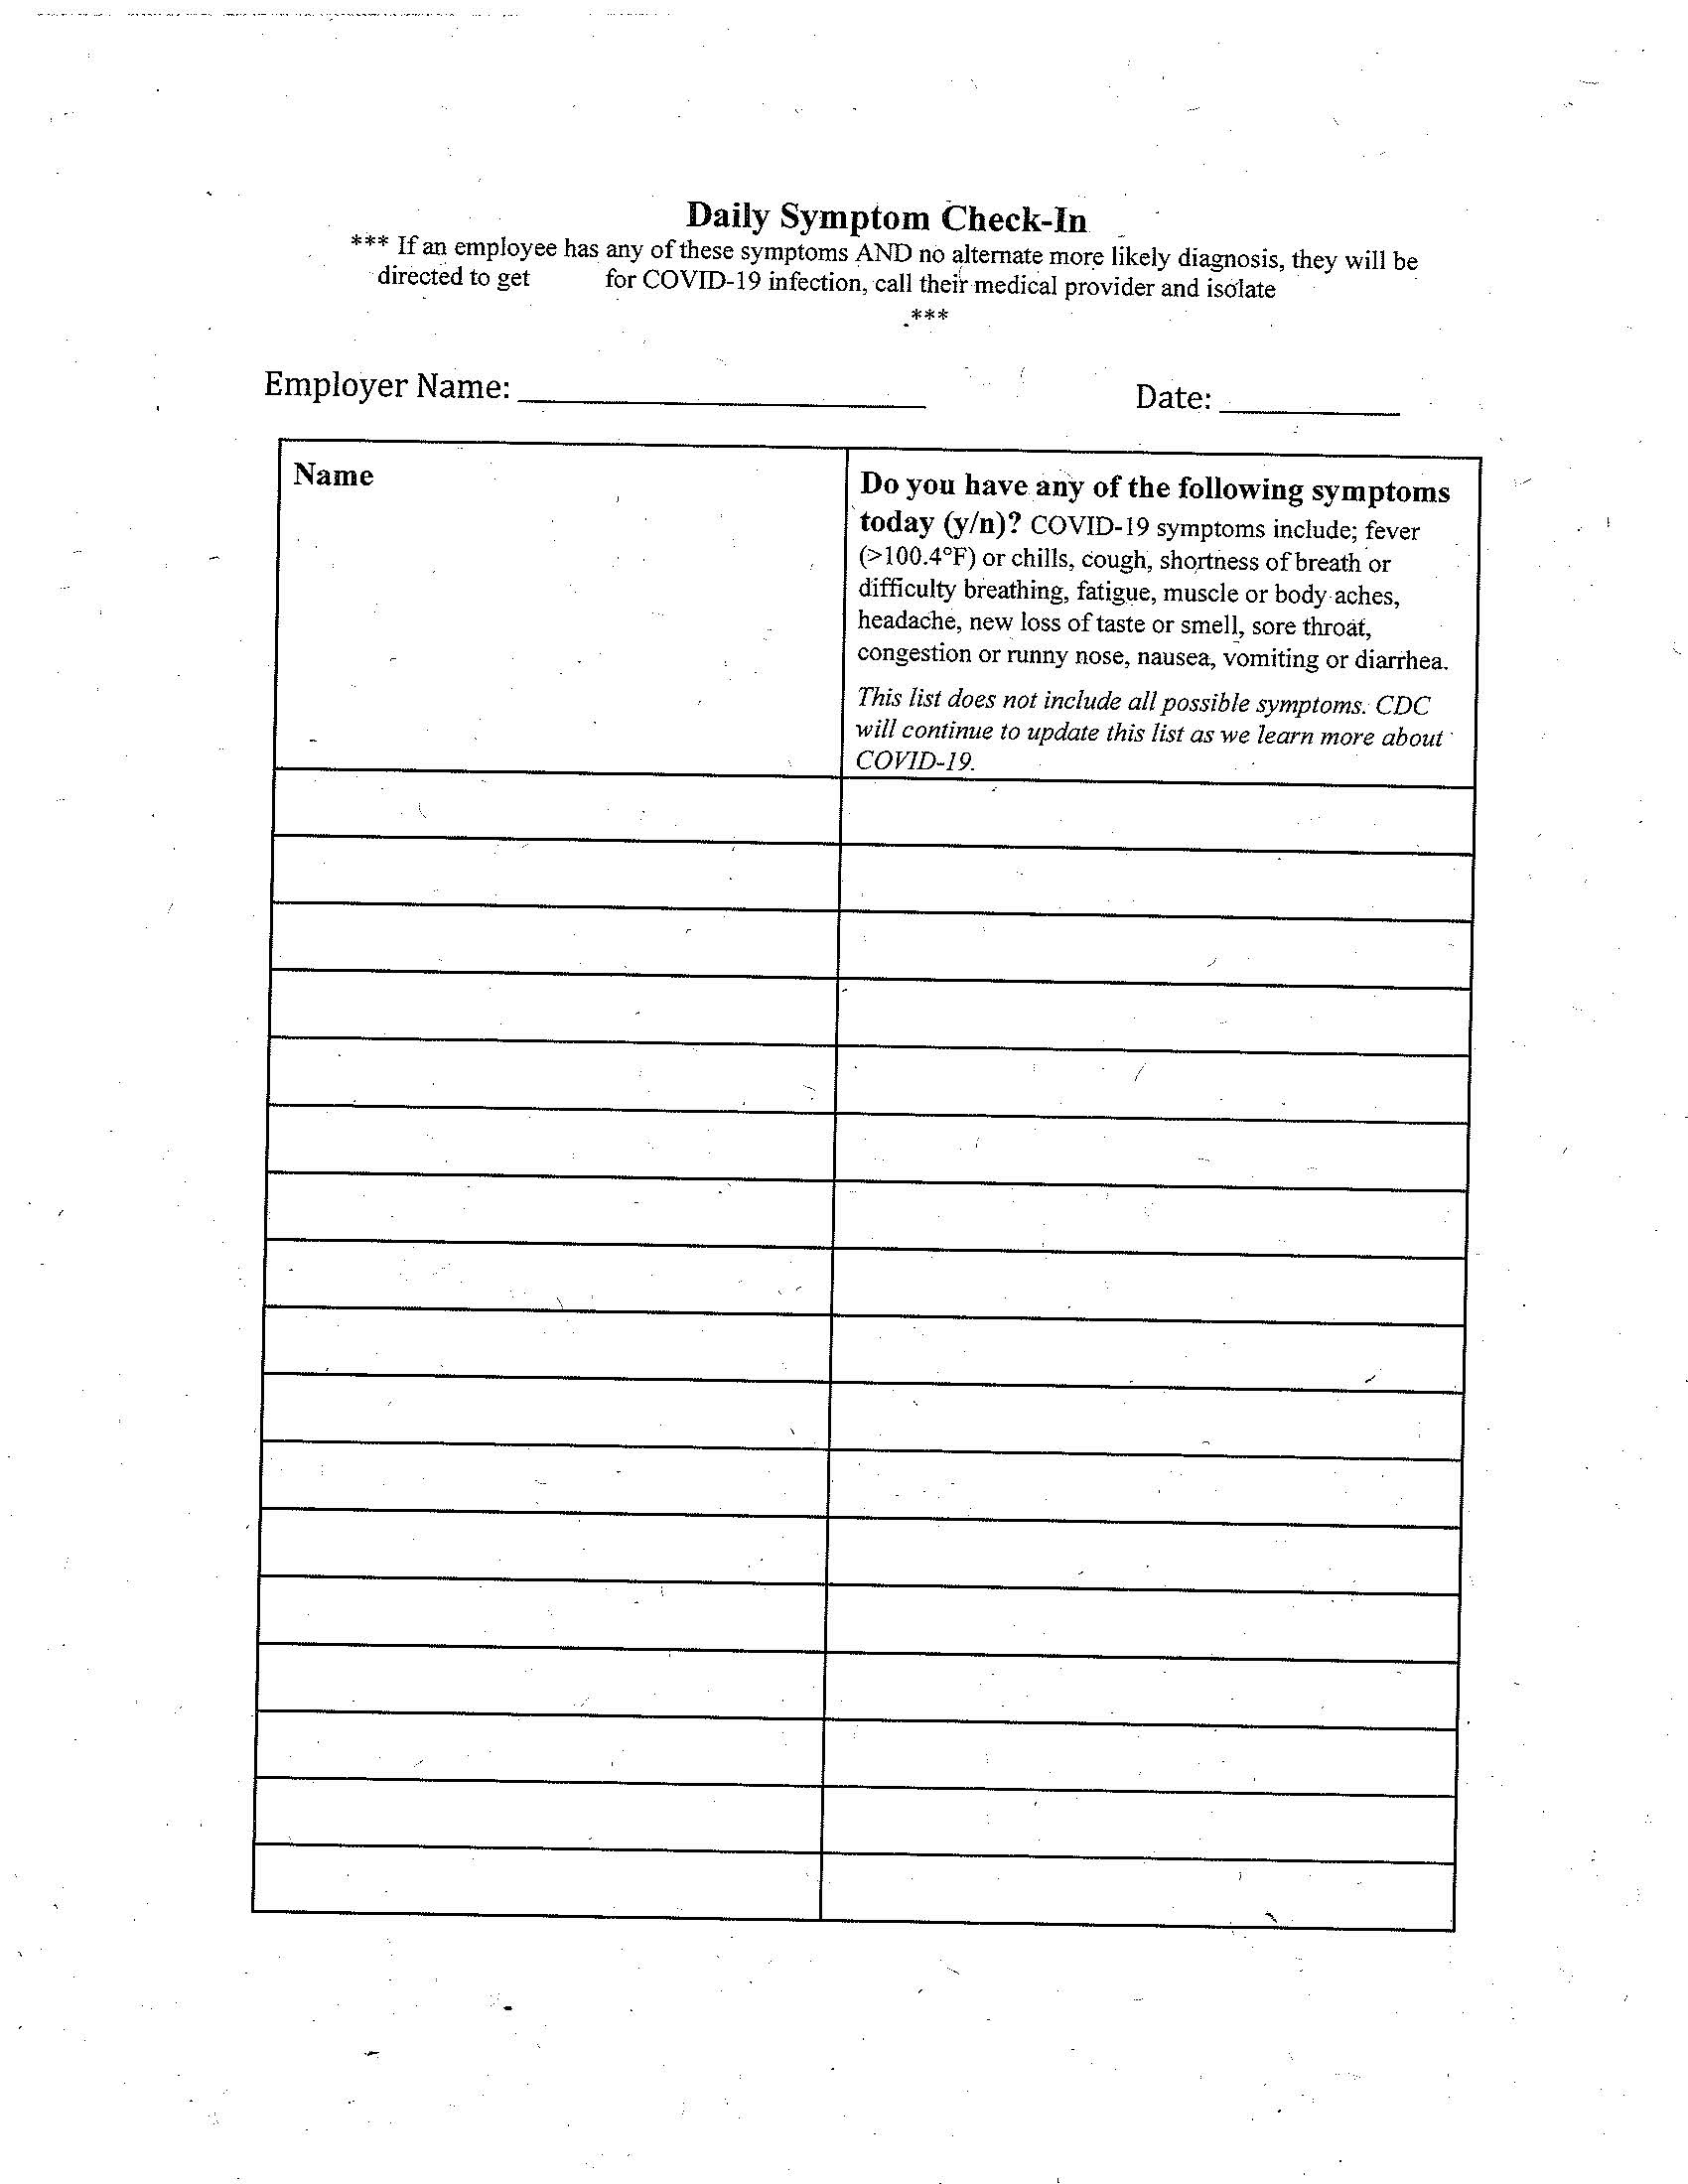 Summit County Public Health form page 7